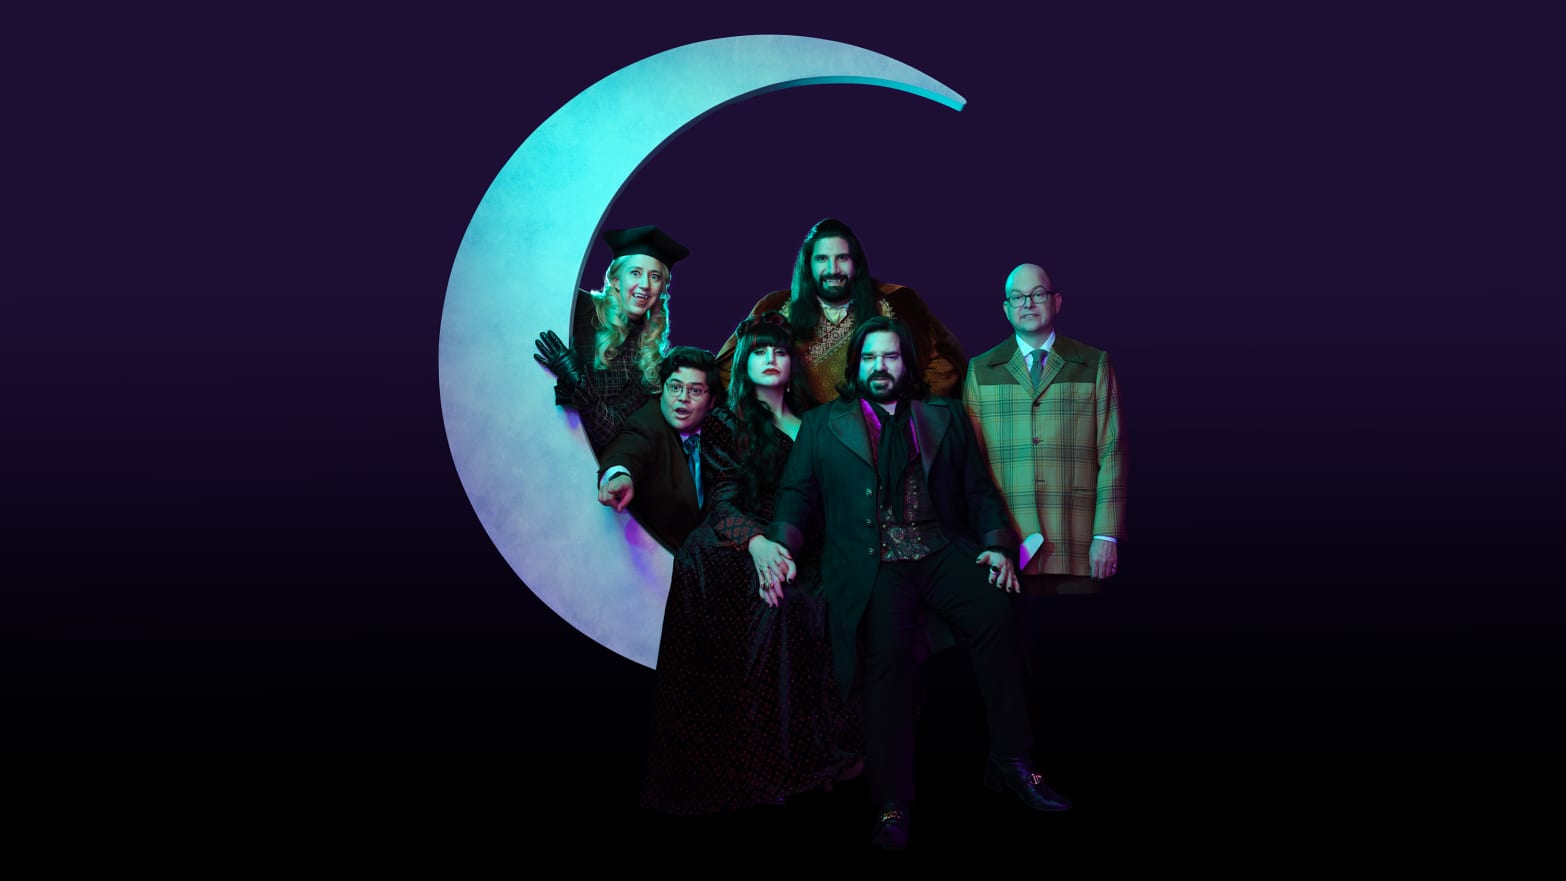 An image of the cast of What We Do in the Shadows sitting on a moon